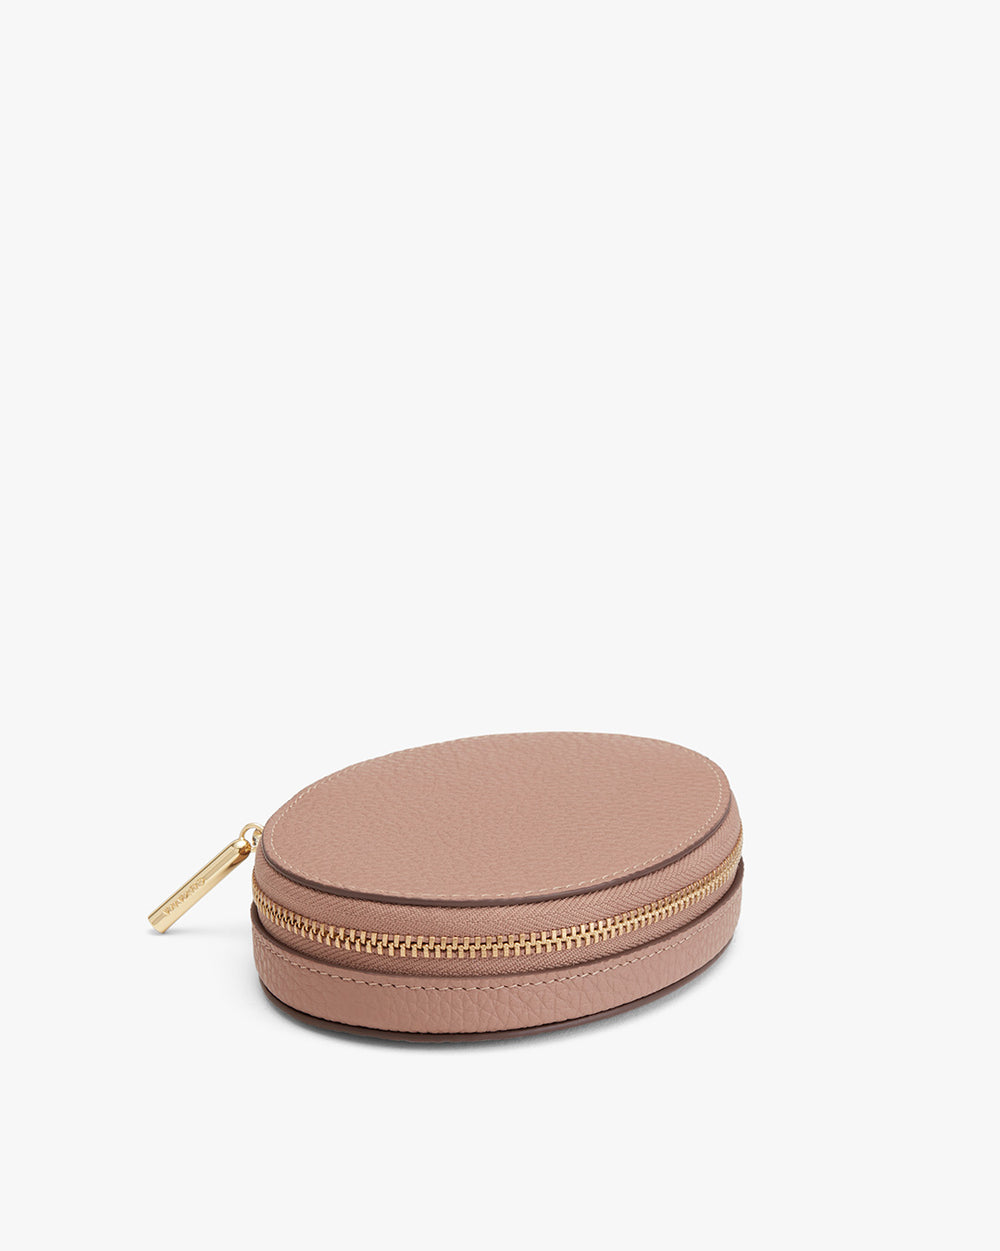 Round zipper case with pull tab on a plain background.